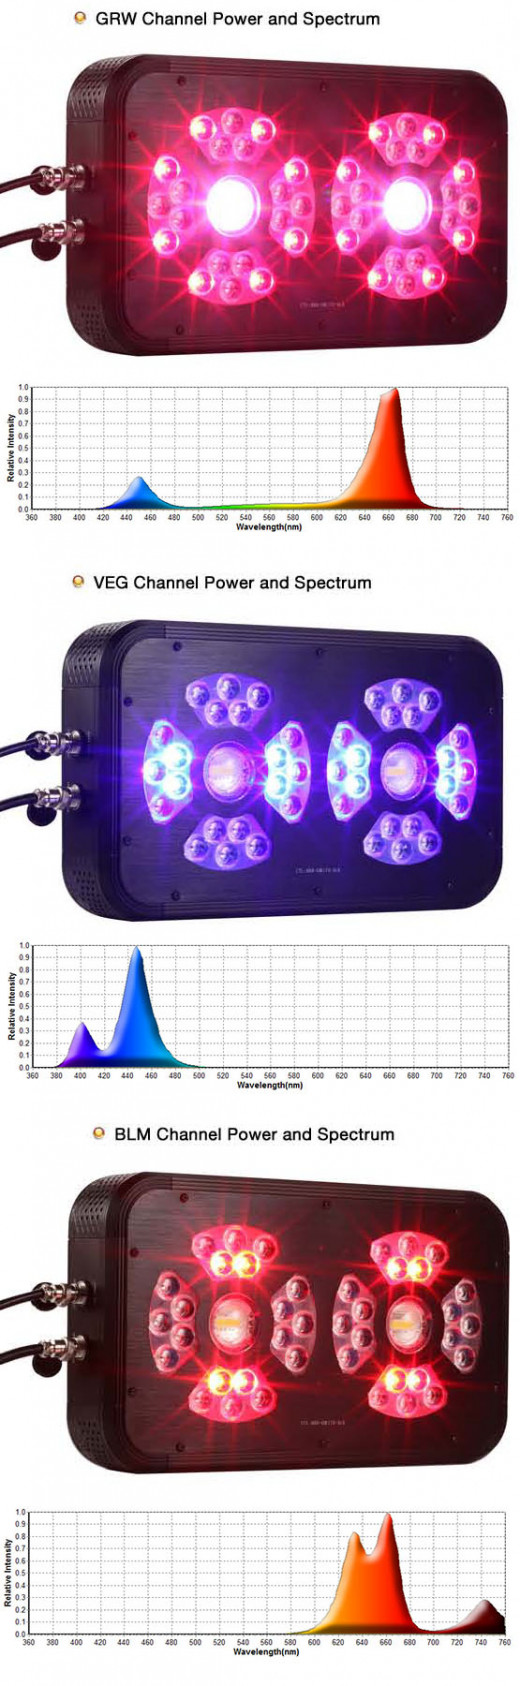 When buying an LED grow light try to choose a complete full spectrum light over one that only uses red and blue.